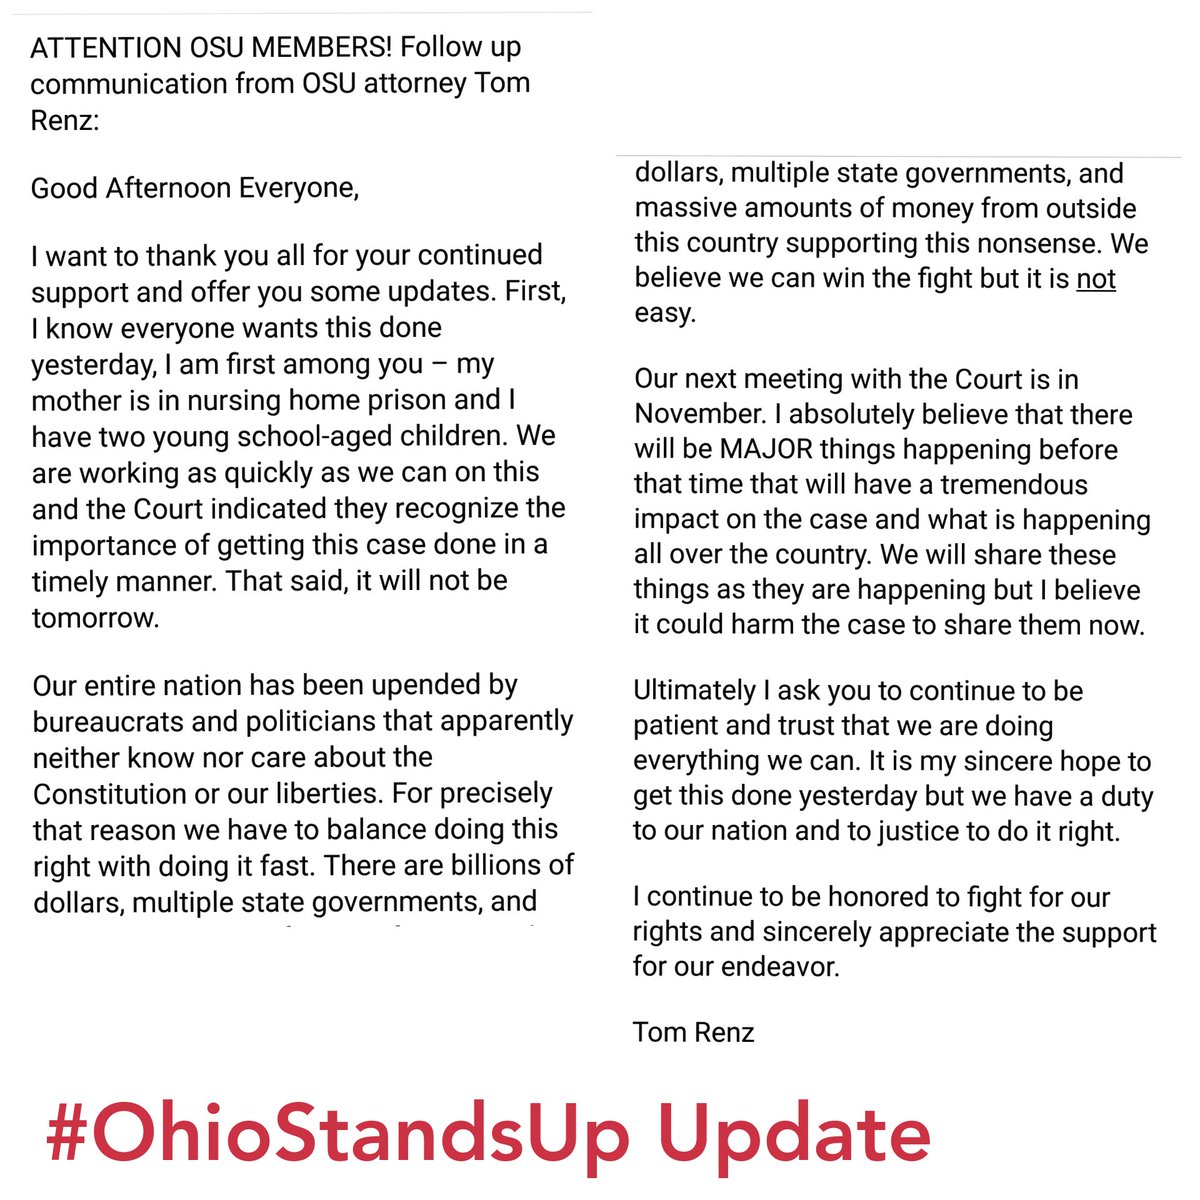  #OhioStandUp ... More updates from attorney Tom Renz  #Ohio  #Lawsuit  #Unconstitutional  #September11